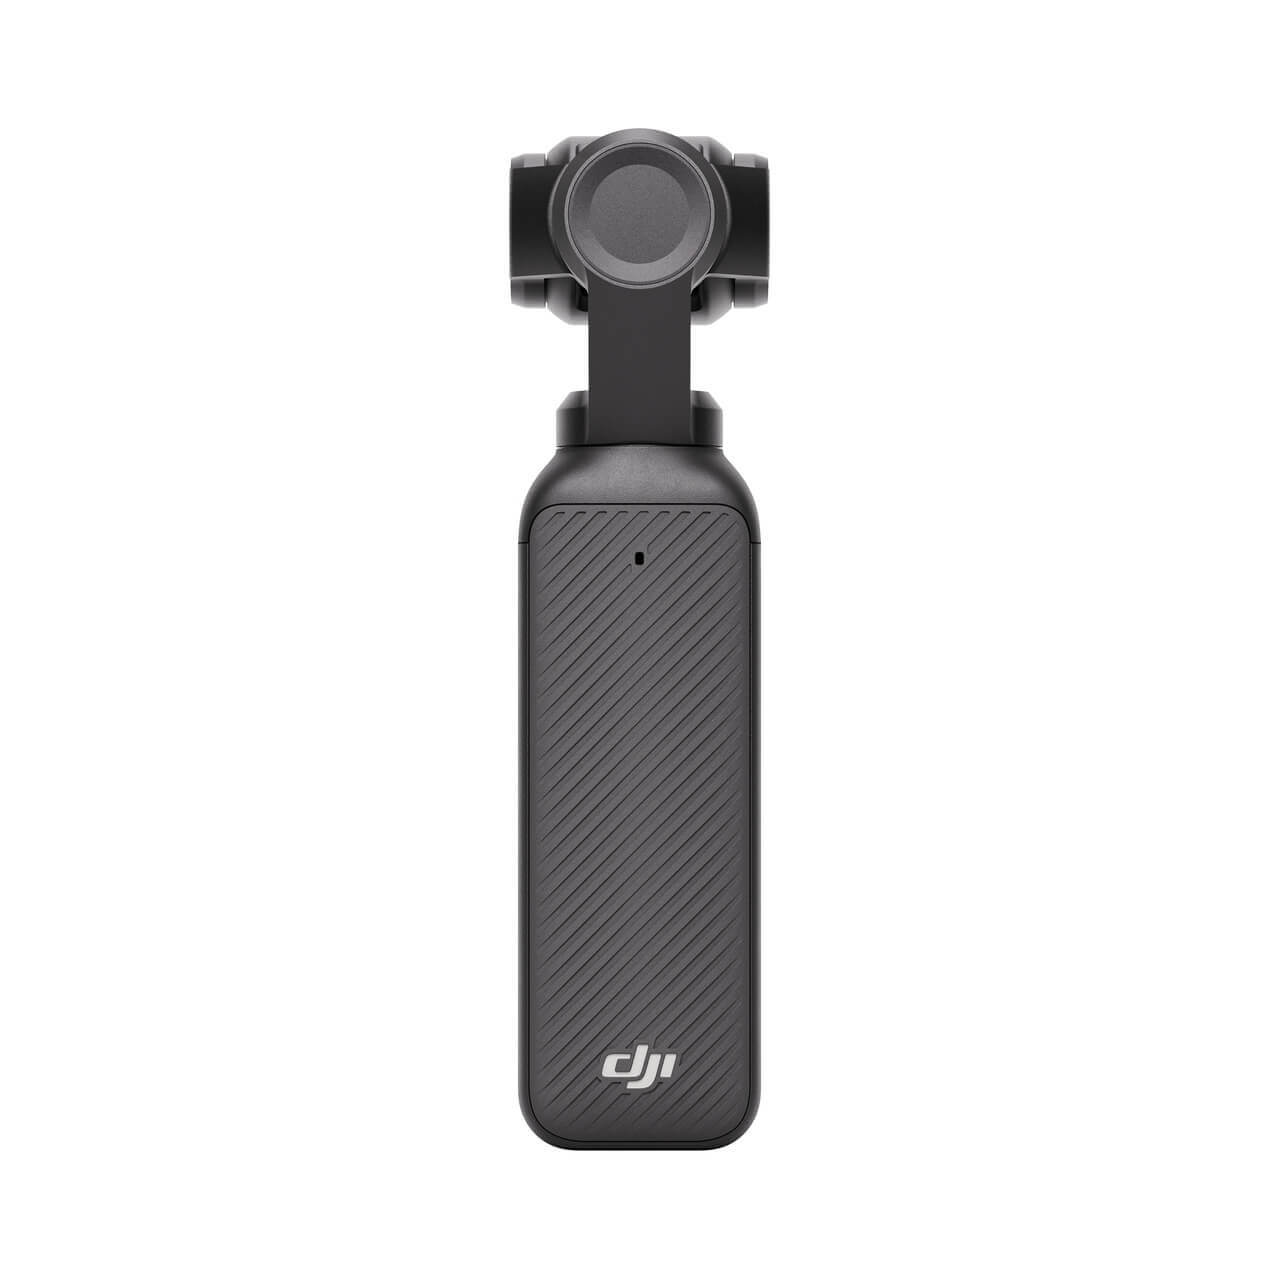 1698398923 907 DJI Osmo Pocket 3 introduced features and price